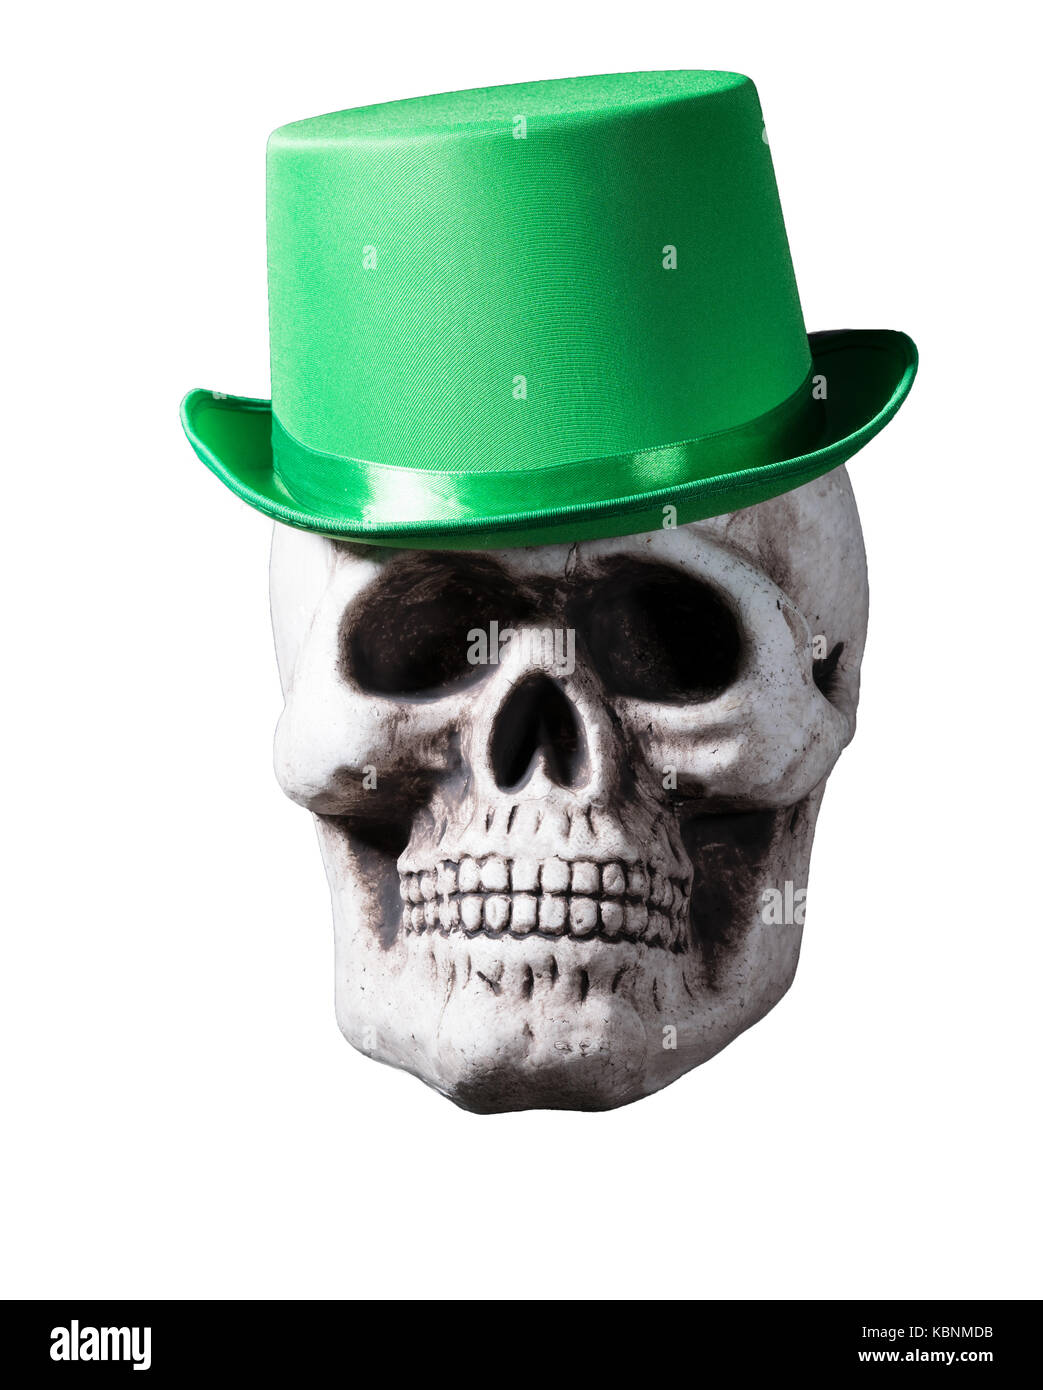 Isolated skull with green hat Stock Photo